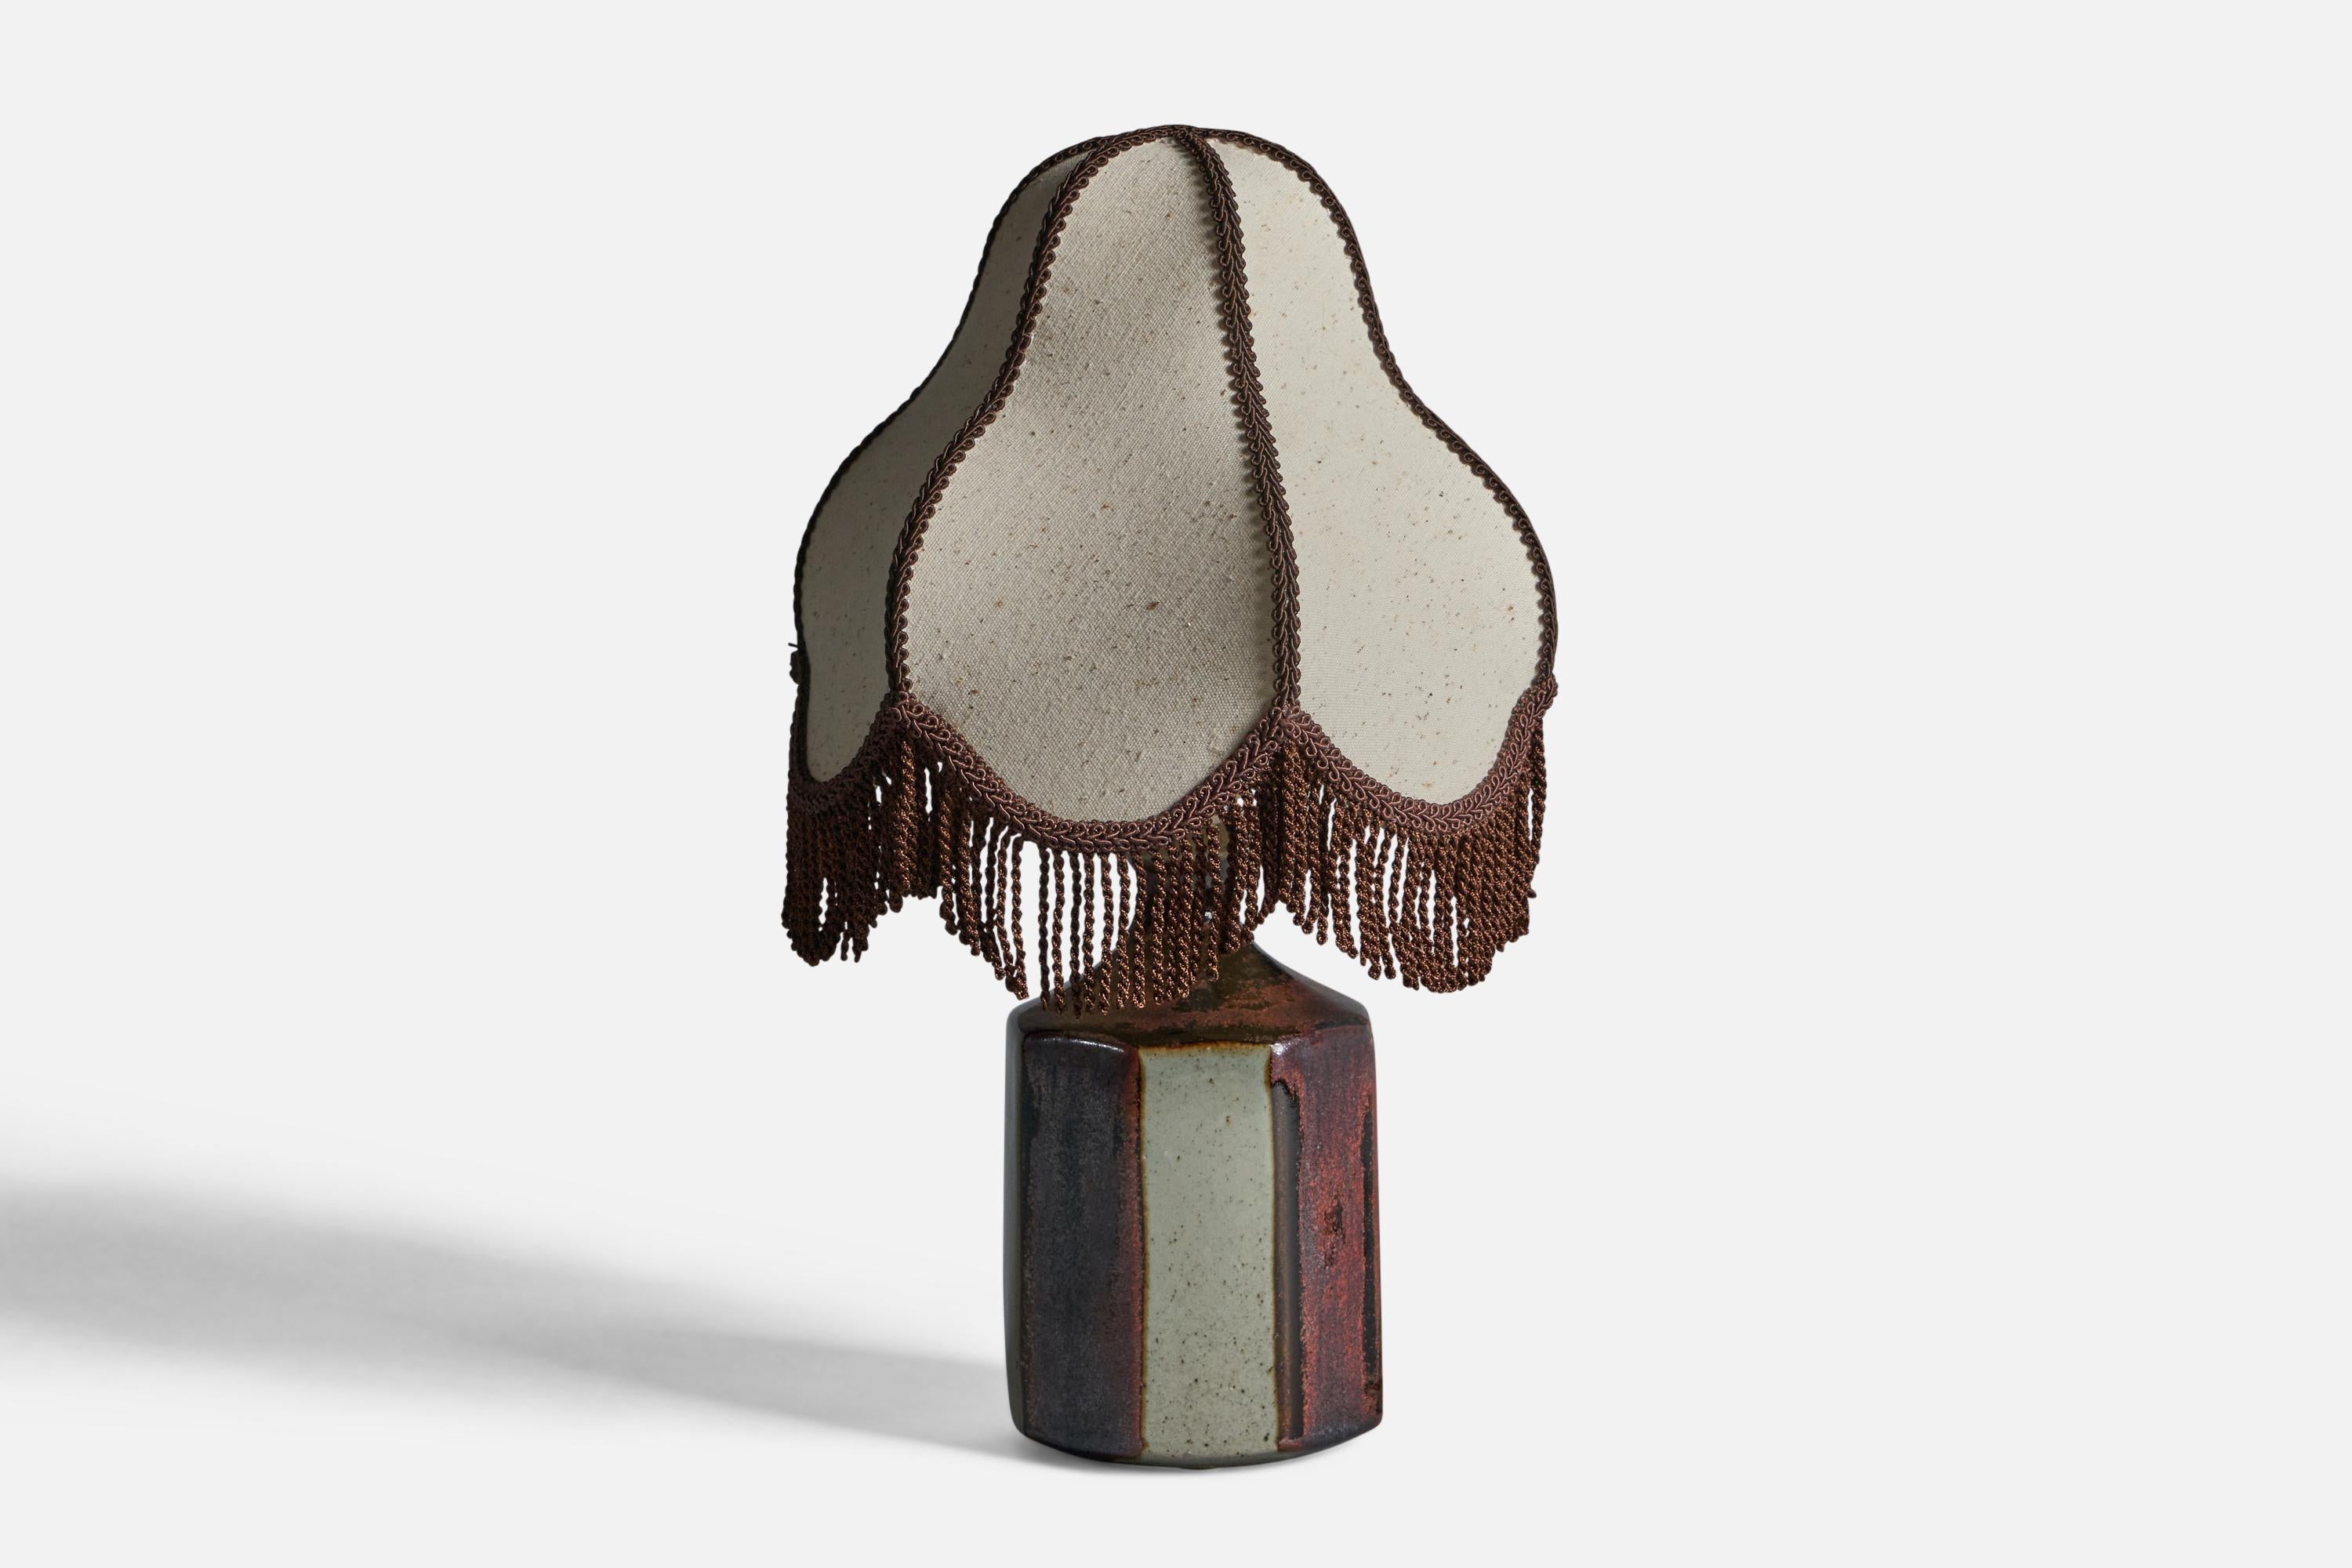 A red and light-grey glazed stoneware and grey brown fabric table lamp, designed by Marianne Starck and produced by Michael Andersen, Bornholm, Denmark, 1960s.

Overall Dimensions (inches): 14.5